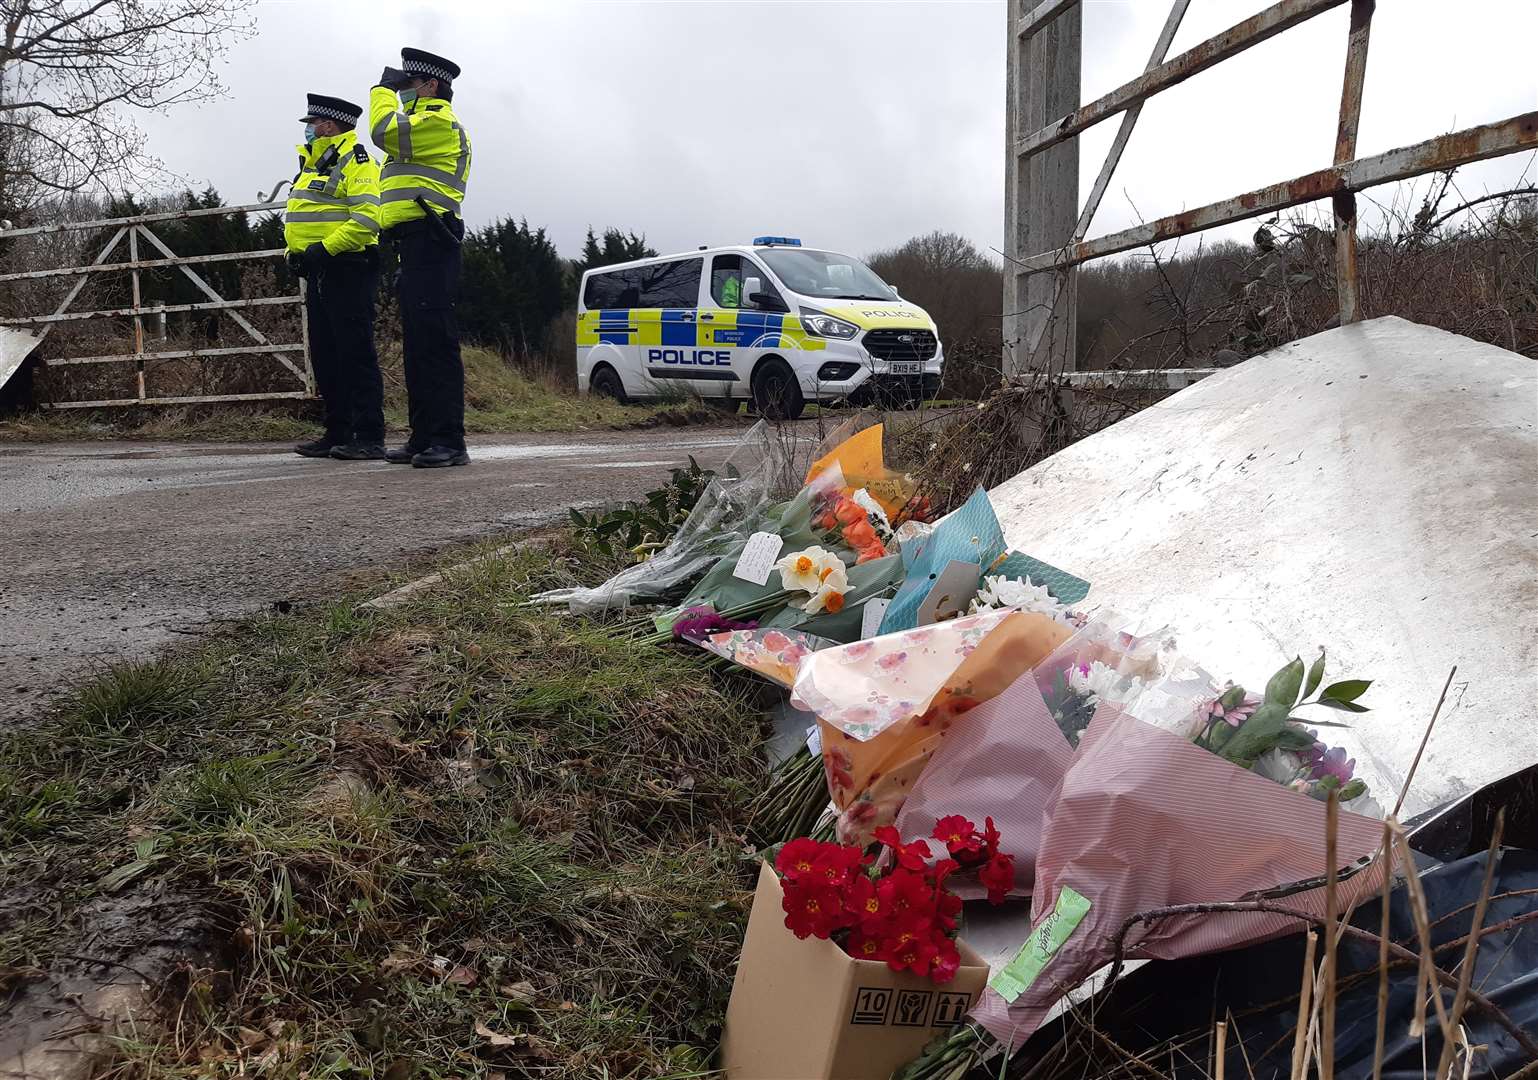 Flowers were left for Sarah Everard at the leisure complex entrance after her body was discovered